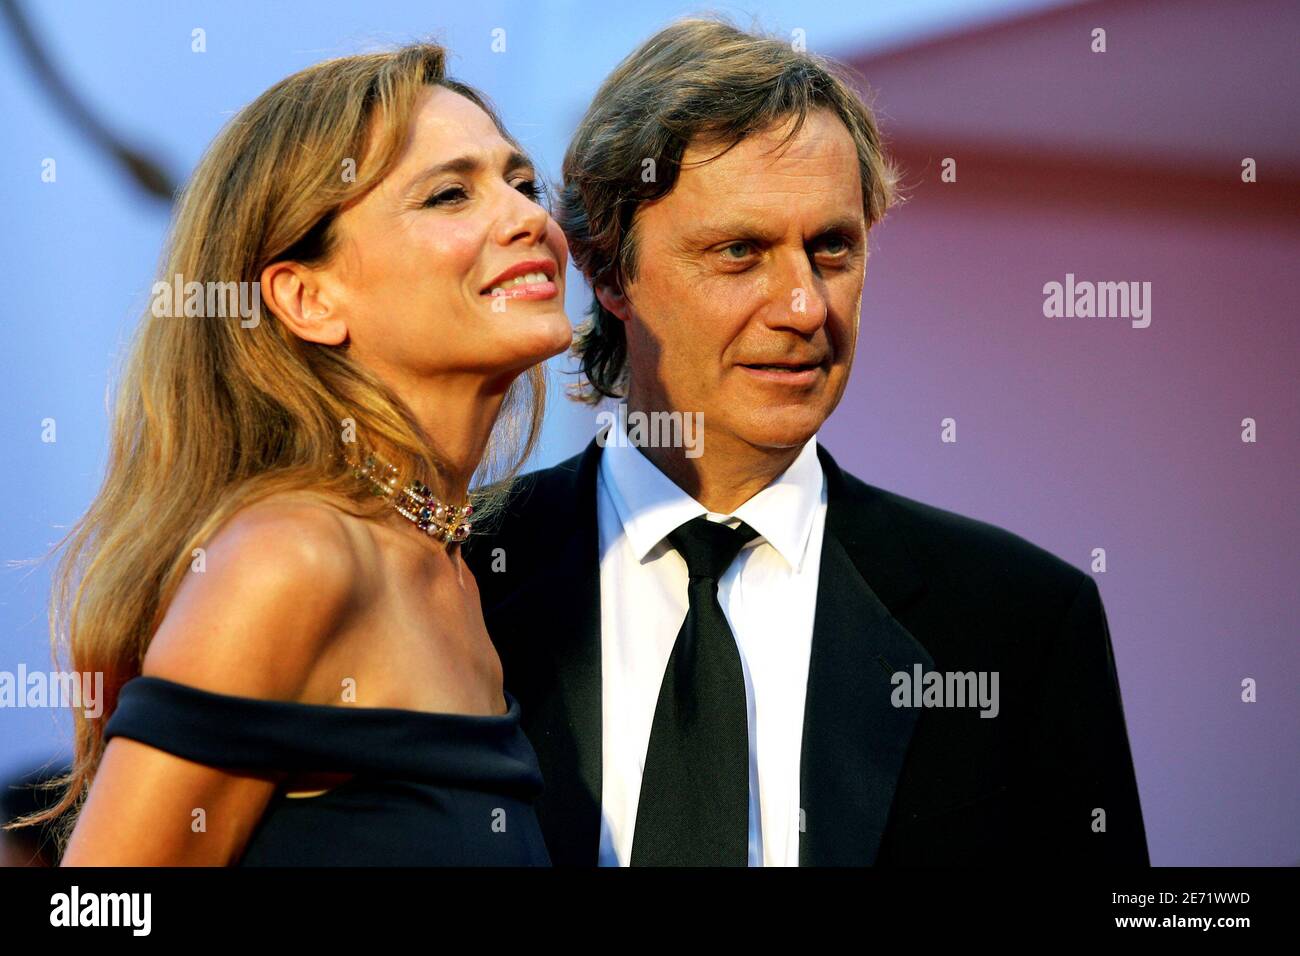 Swedish actress Lena Olin (L) and director Lasse Hallstrom arrive at the  Cinema Palace in Venice September 3, 2005 for the premiere of Swedish  director Lasse Hallstrom's latest movie "Casanova", which is